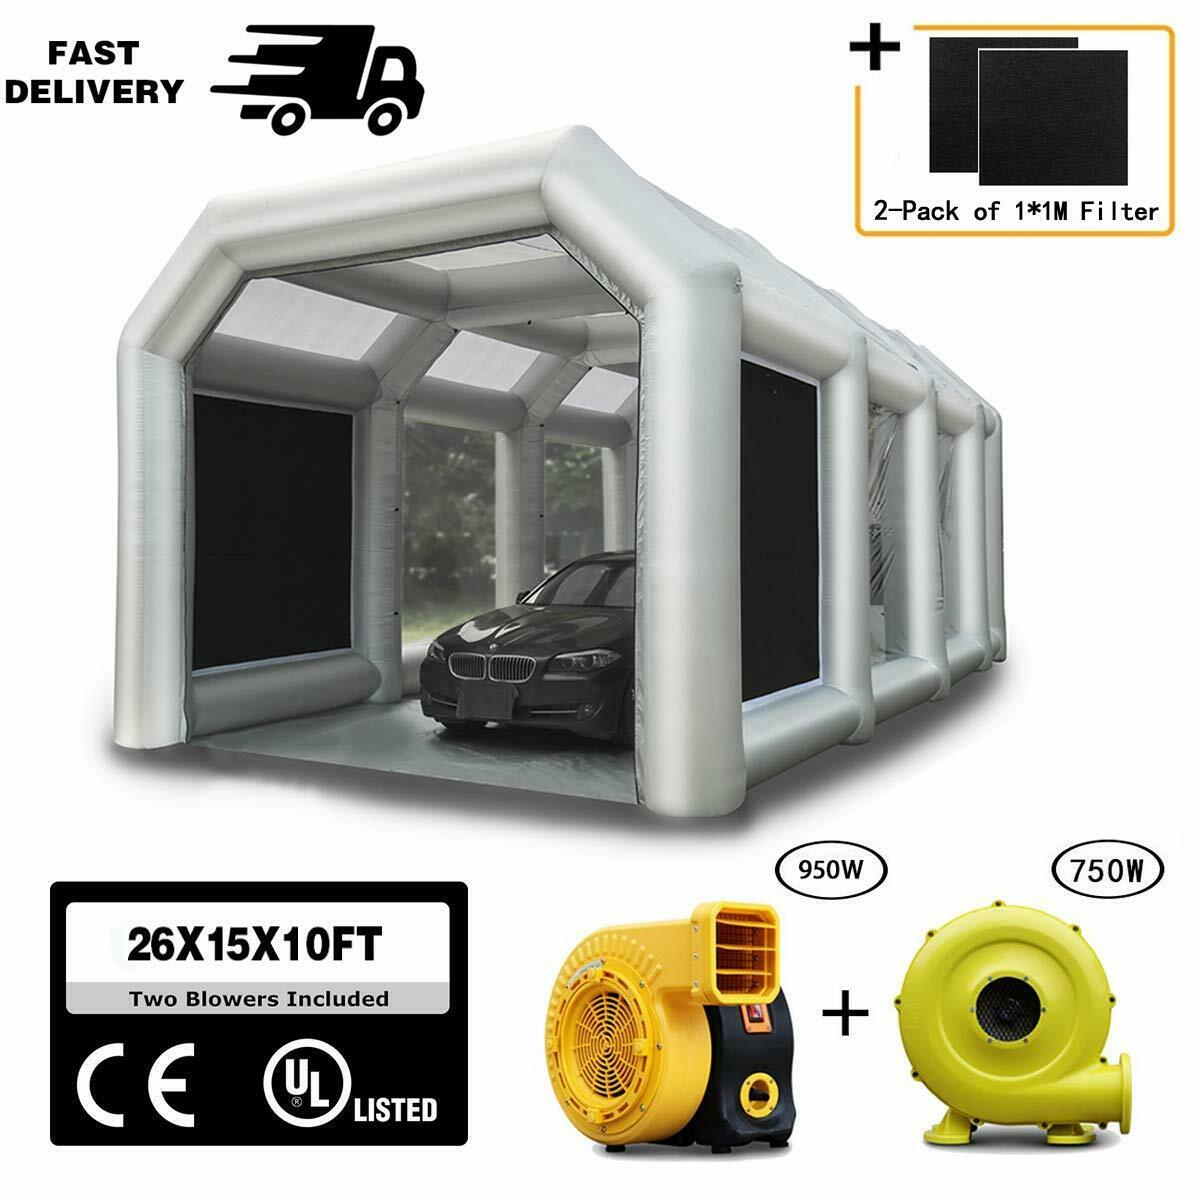 28x15x10ft Inflatable Spray Paint Booth Tent With Two Blowers (950w+750w)